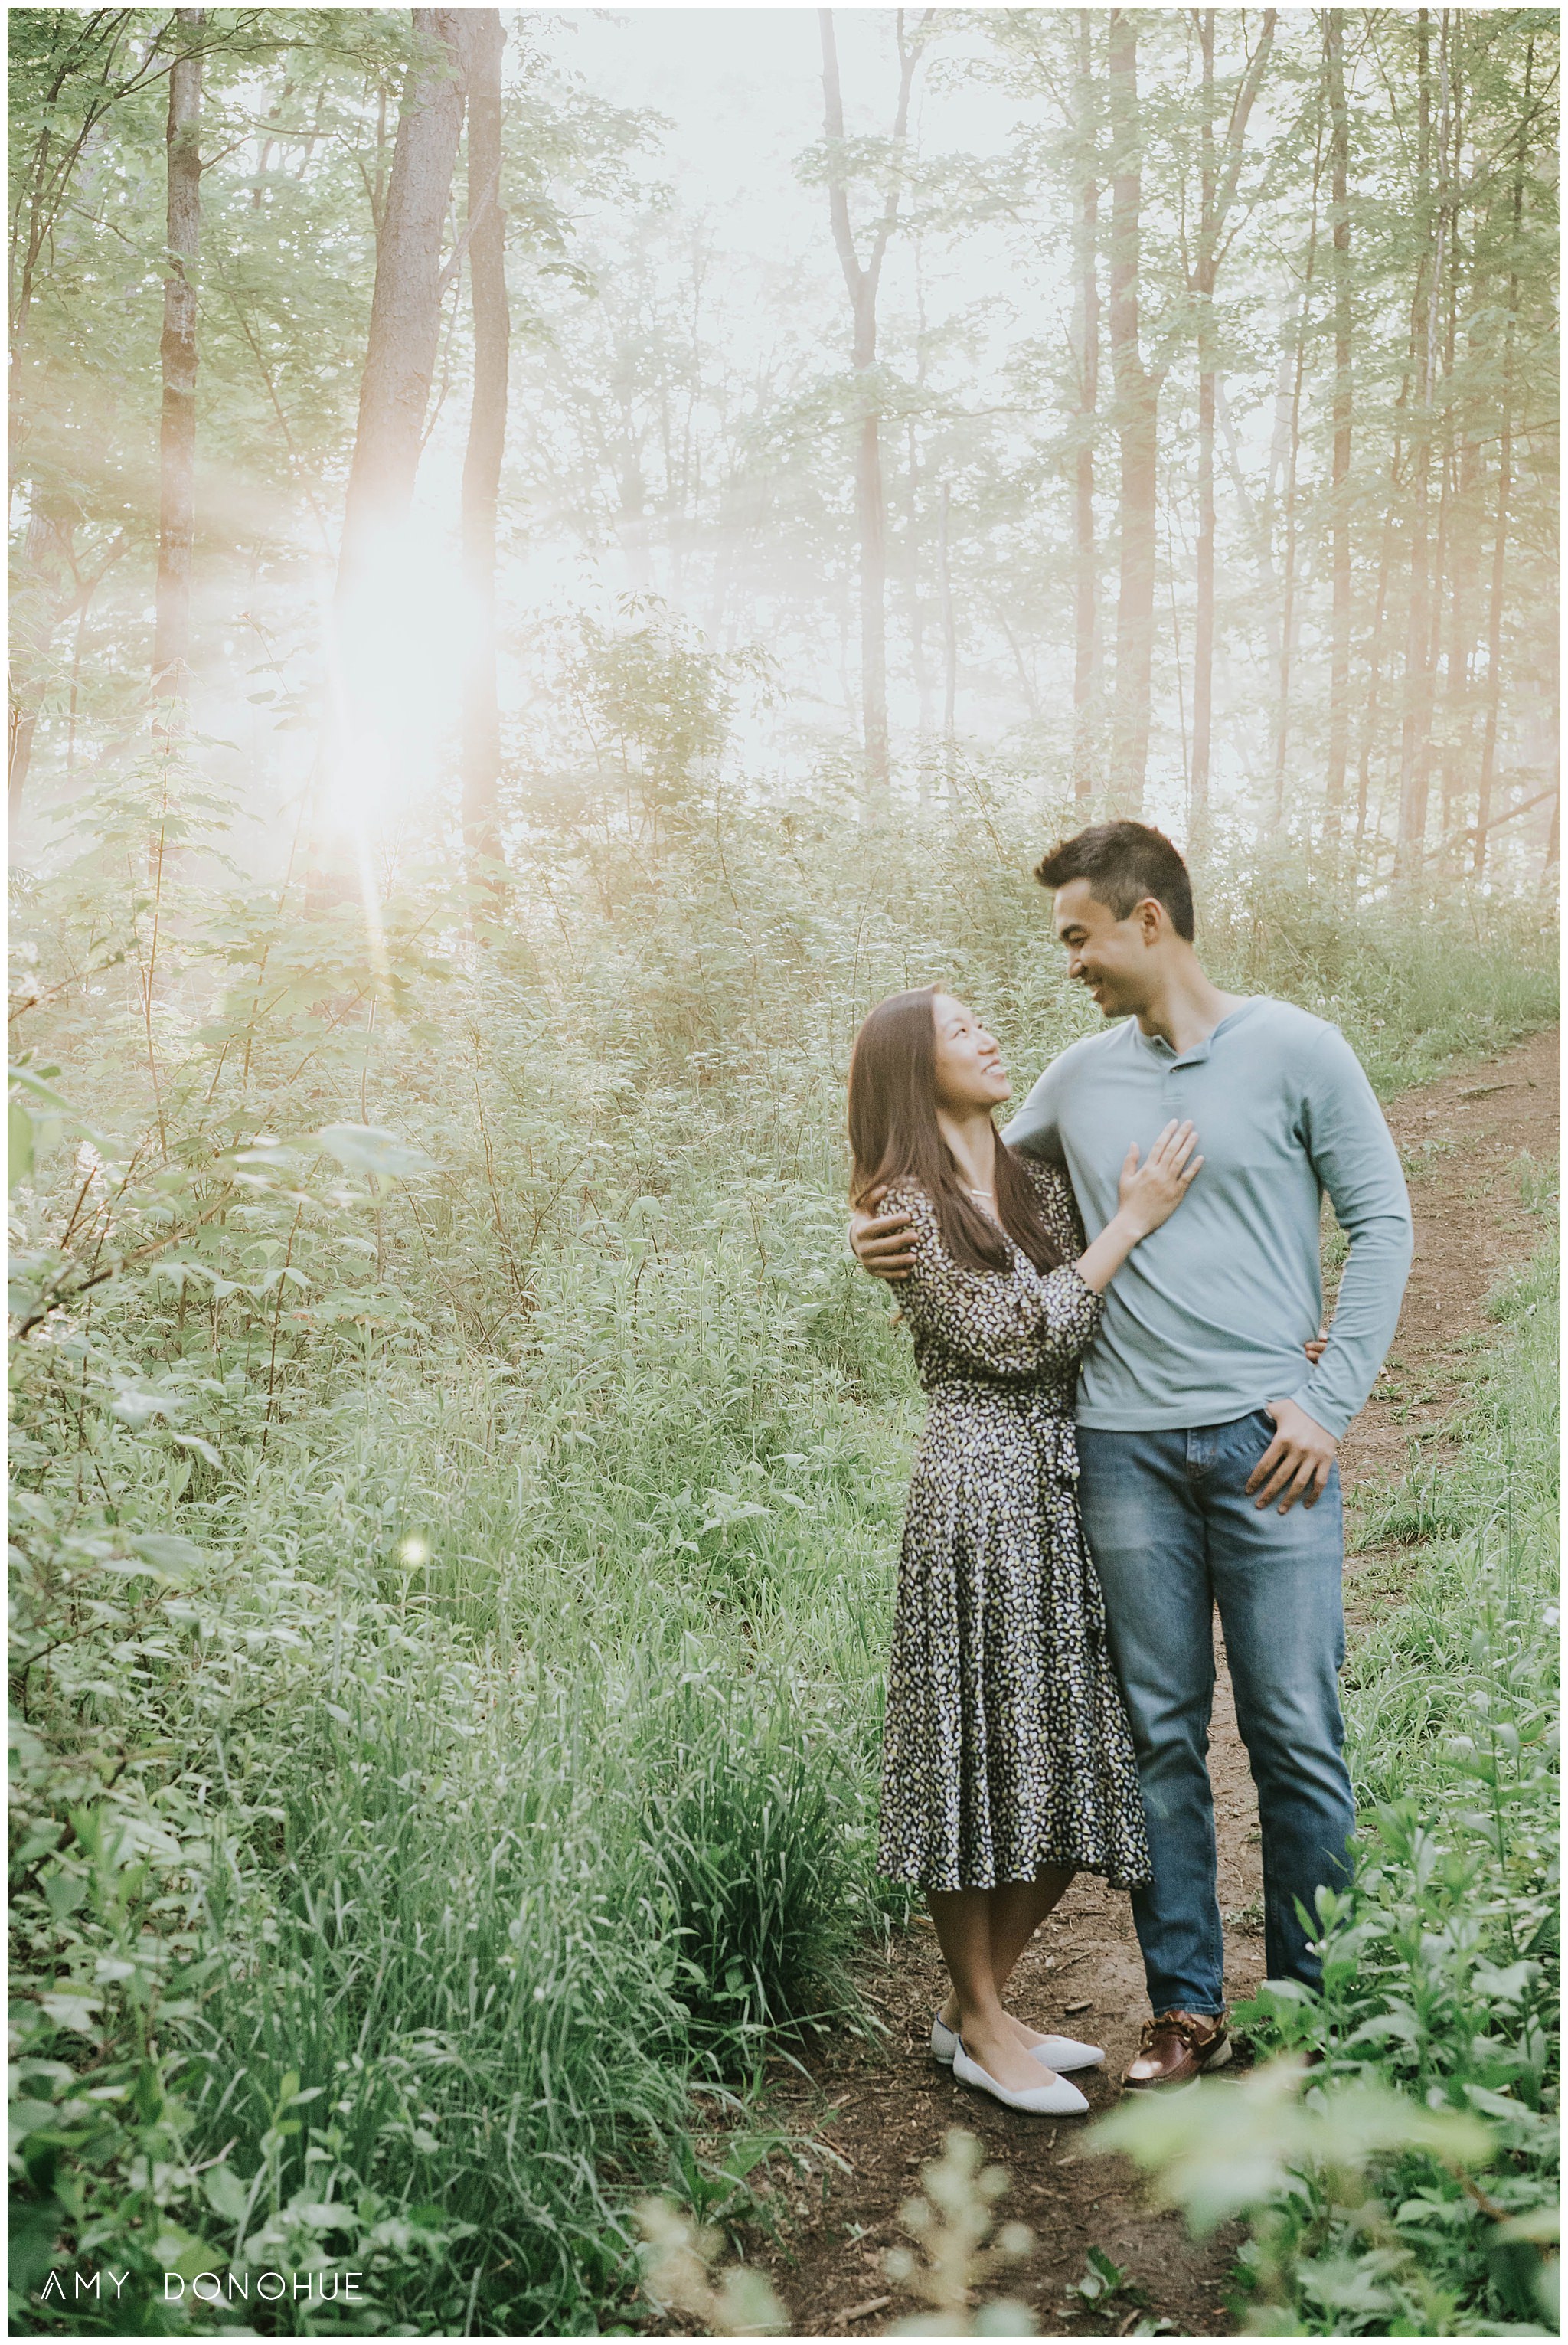 Early morning light during an engagement session at Mount Peg in Woodstock Vermont.